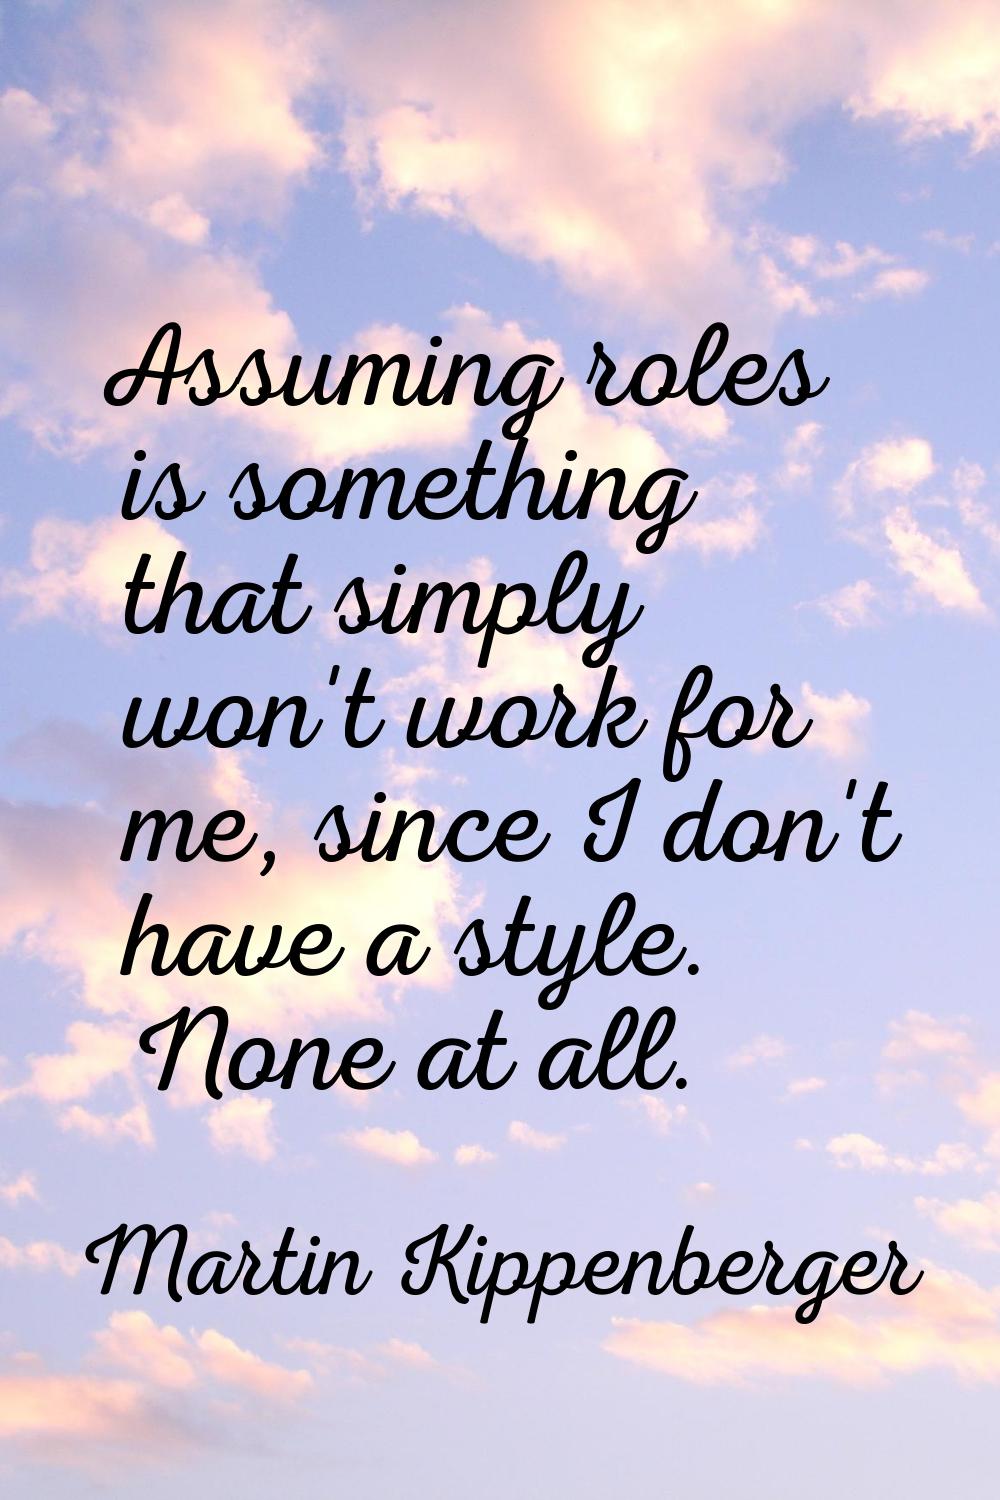 Assuming roles is something that simply won't work for me, since I don't have a style. None at all.